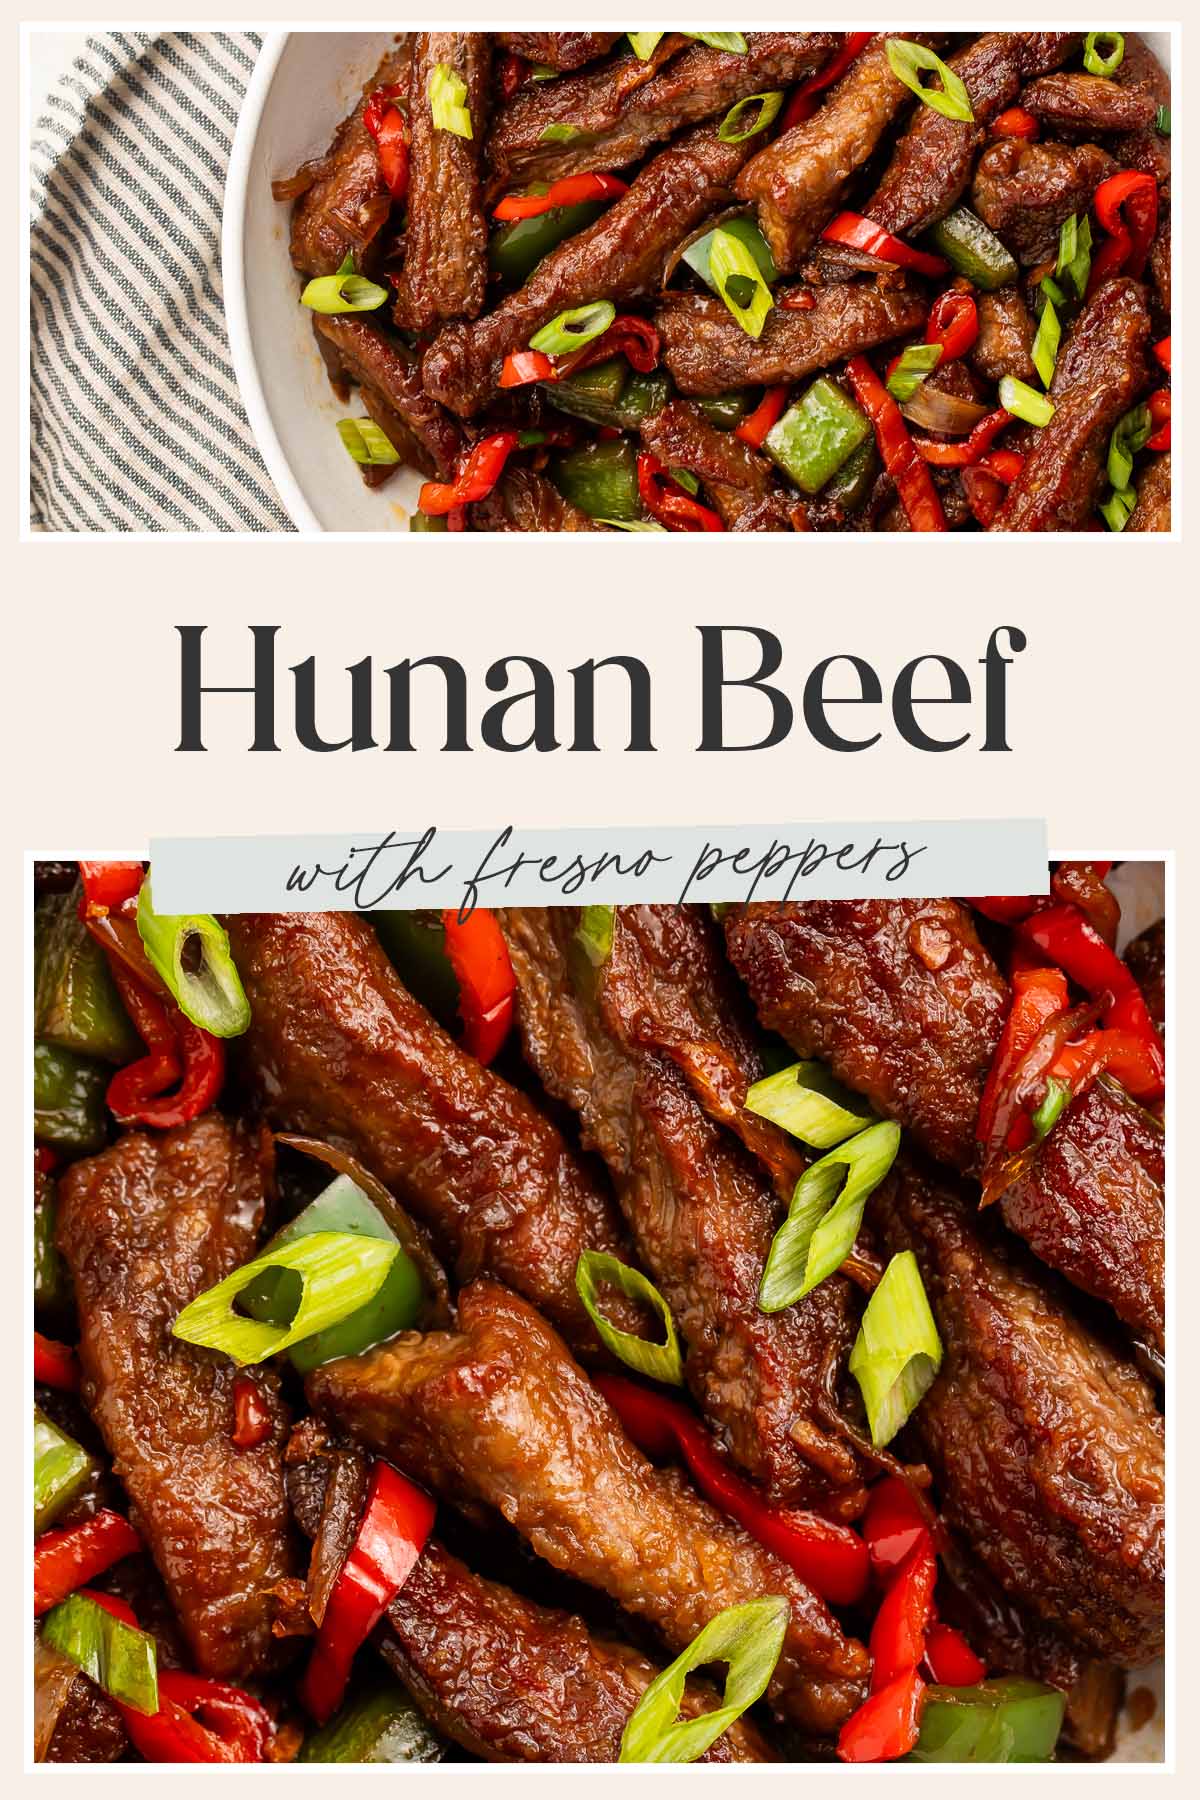 Pin graphic for hunan beef.